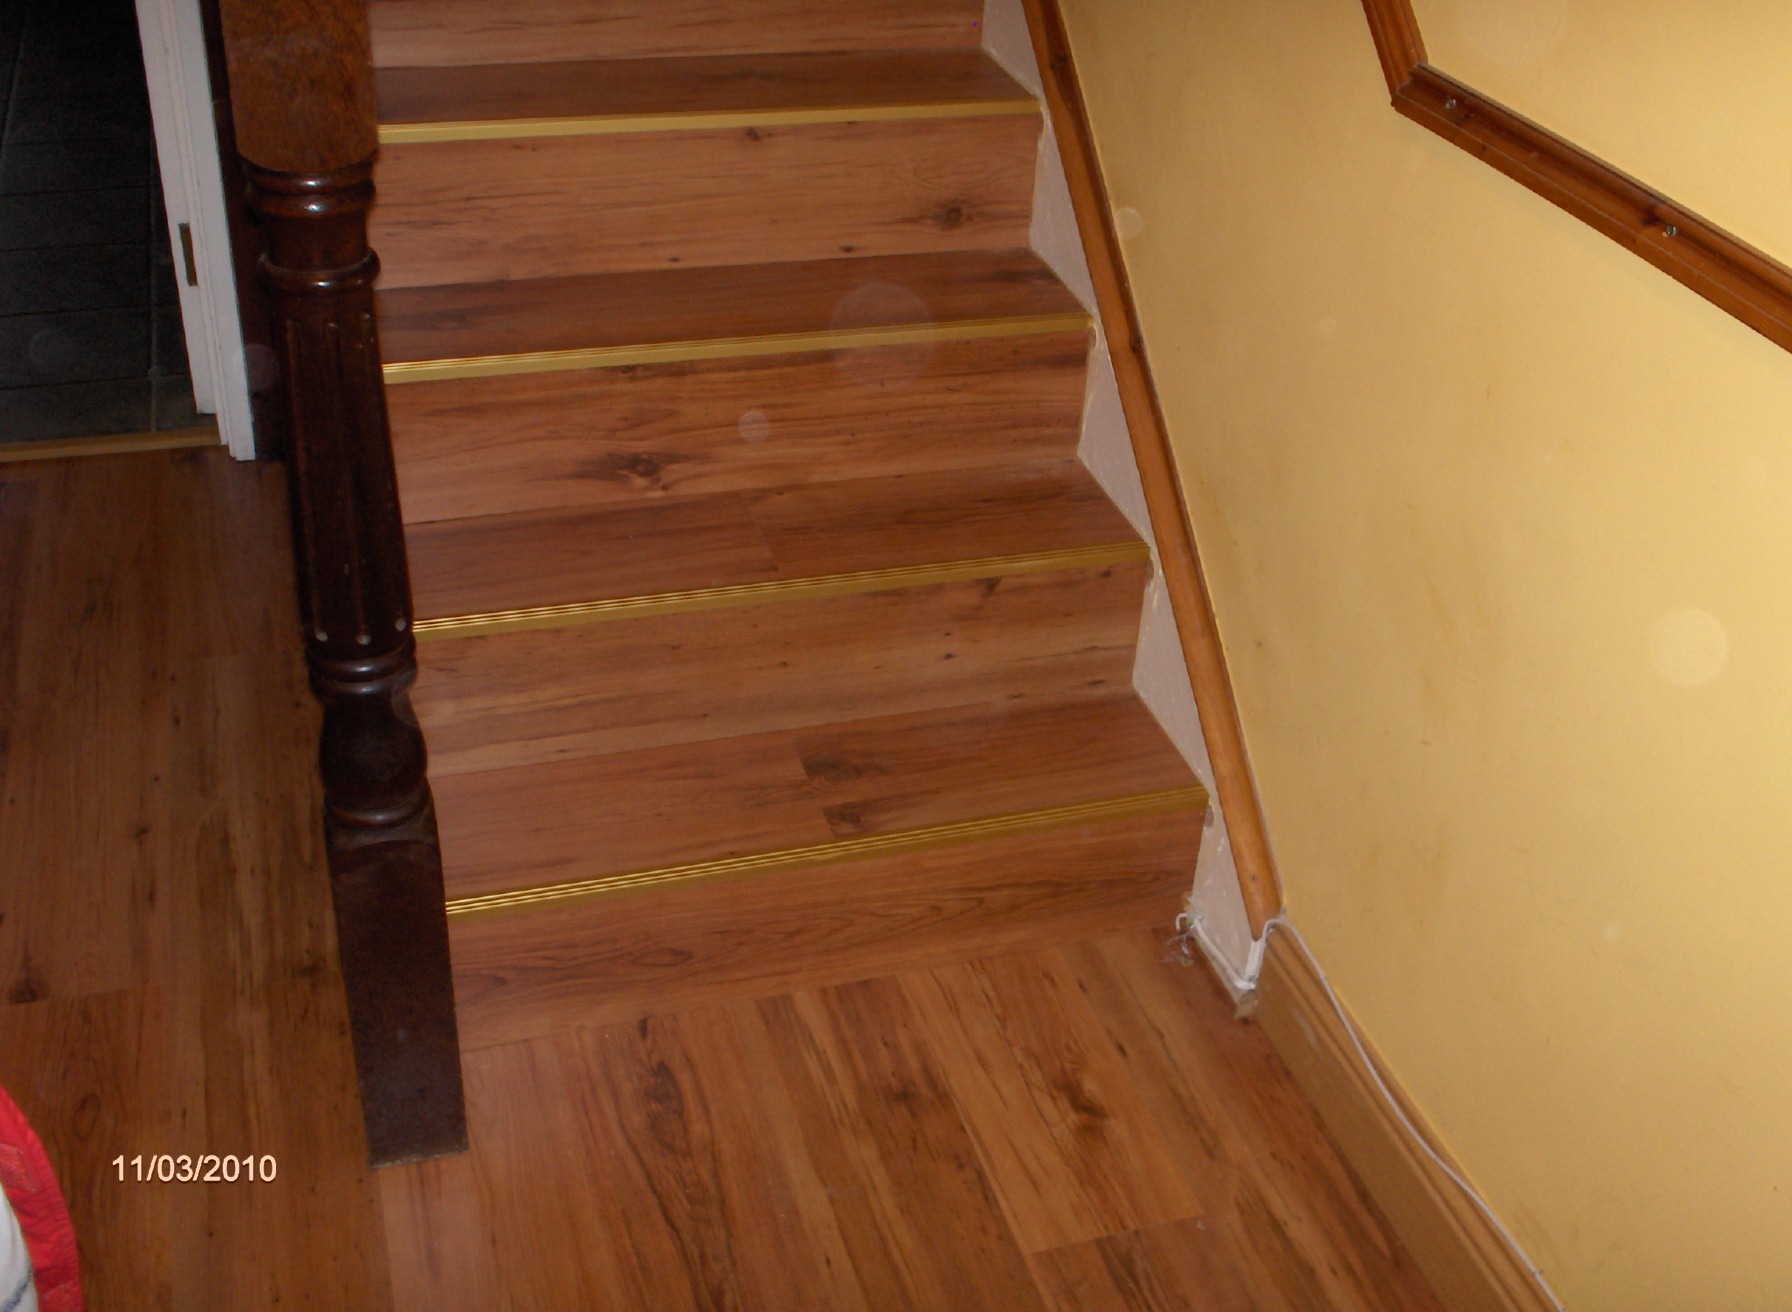 Hall Stairs And Landing Done In Laminate Flooring